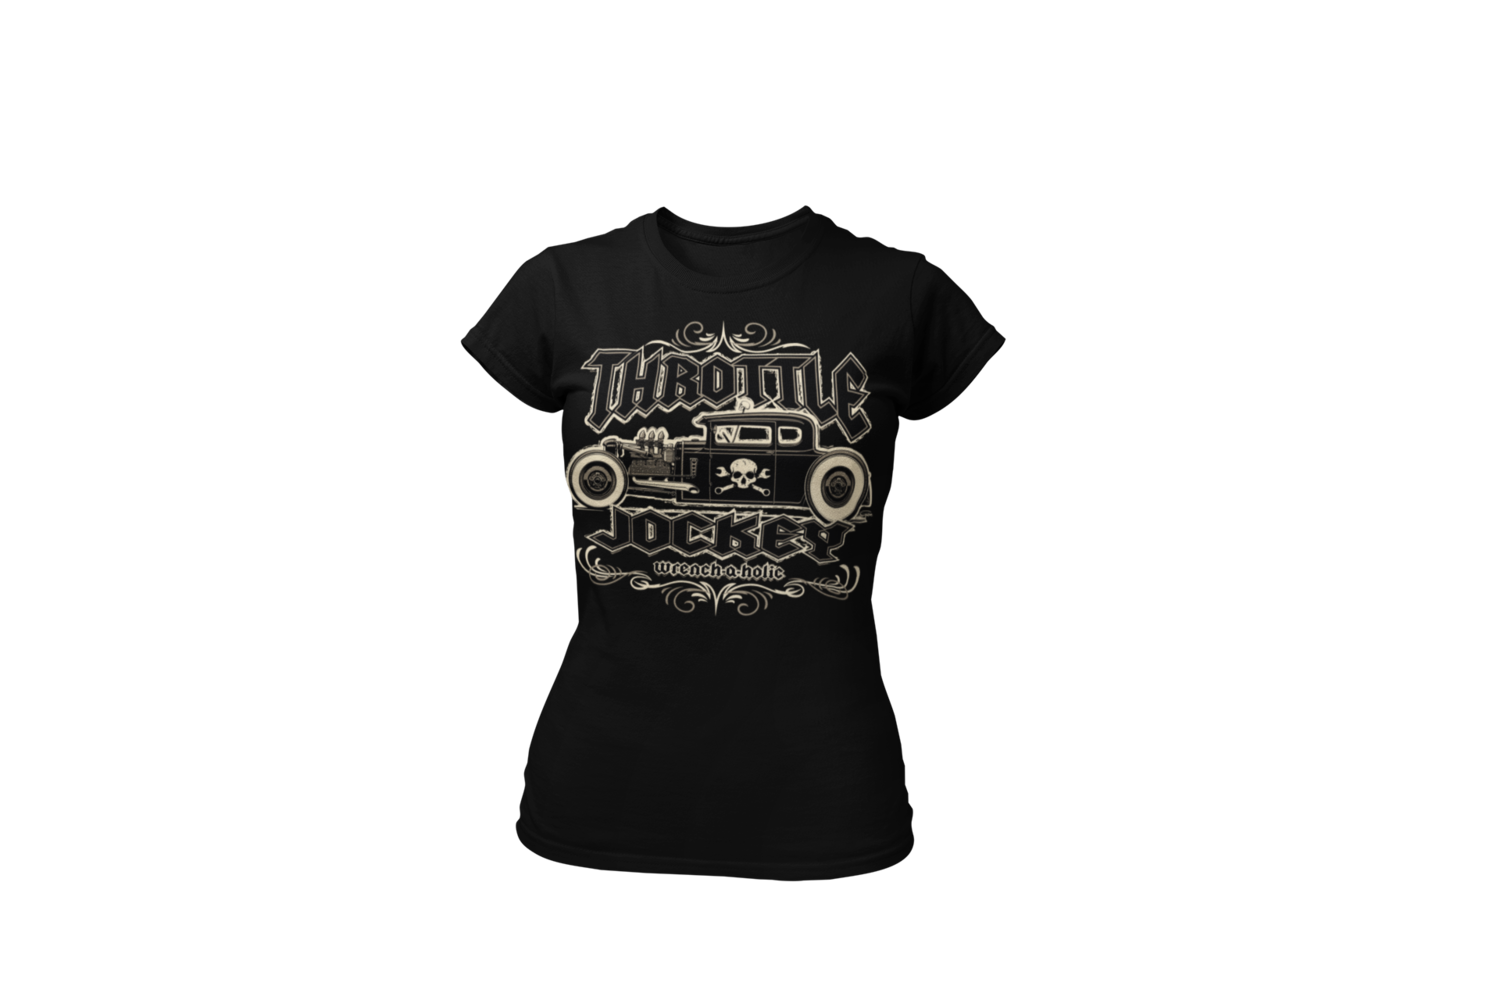 THROTTLE JOCKEY "Wrench a holic" T-SHIRT WOMAN by Ger "Dutch Courage" Peters artwork